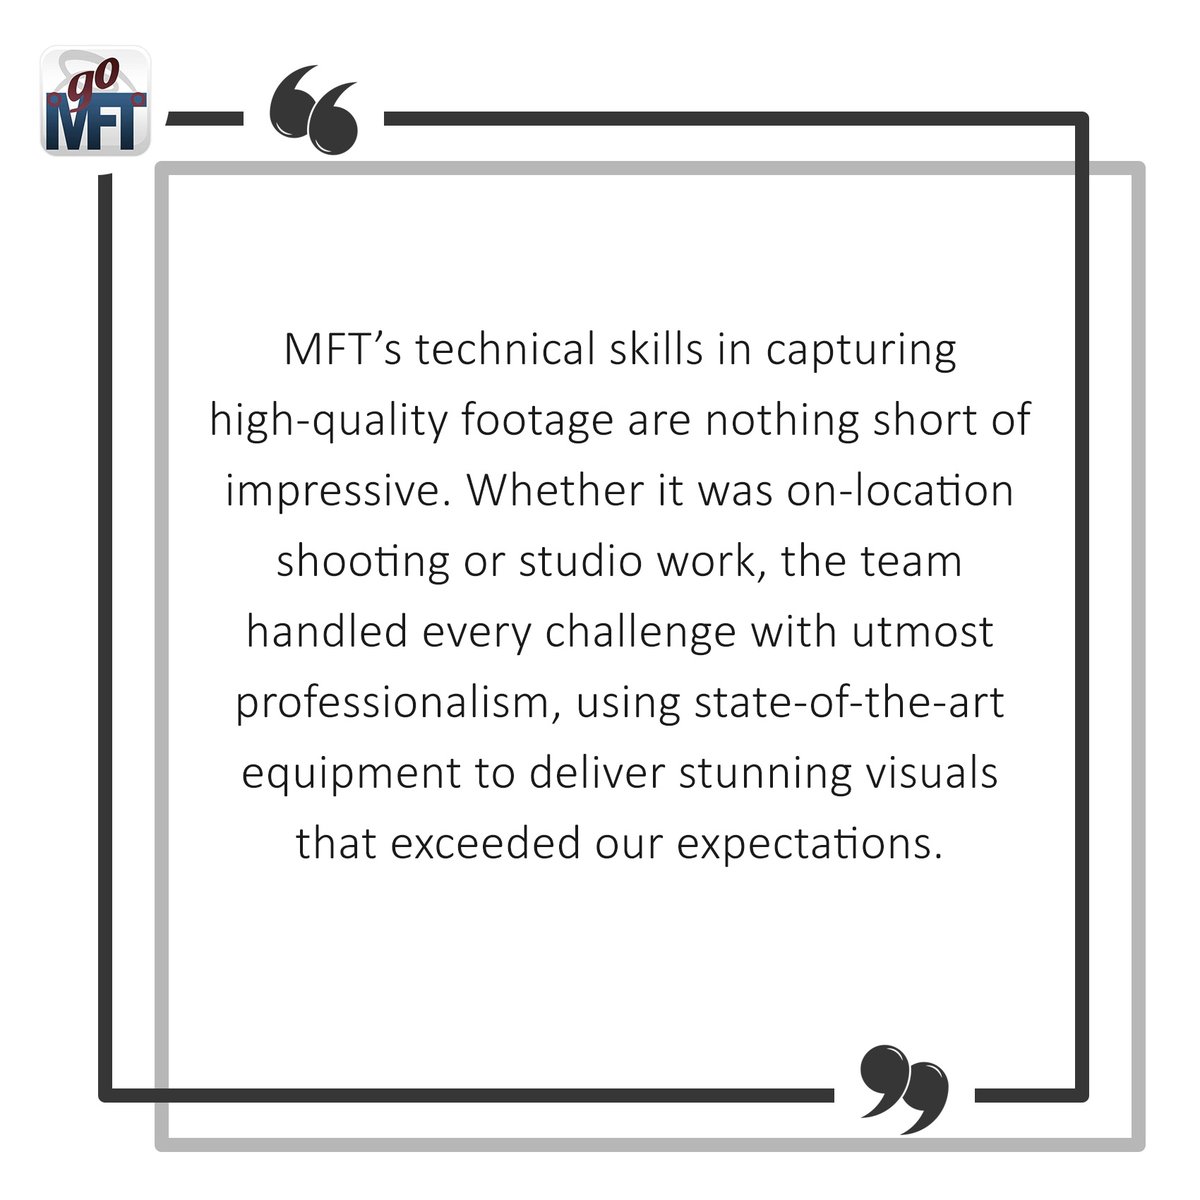 We are continually humbled and honored by the kind comments that our customers share. Our sincere gratitude to you! #Testimonial __ Winning #ContentMarketing & killer #WebsiteDevelopment globally since 1986 #goMFT 877-554-6638 | goMFT.com